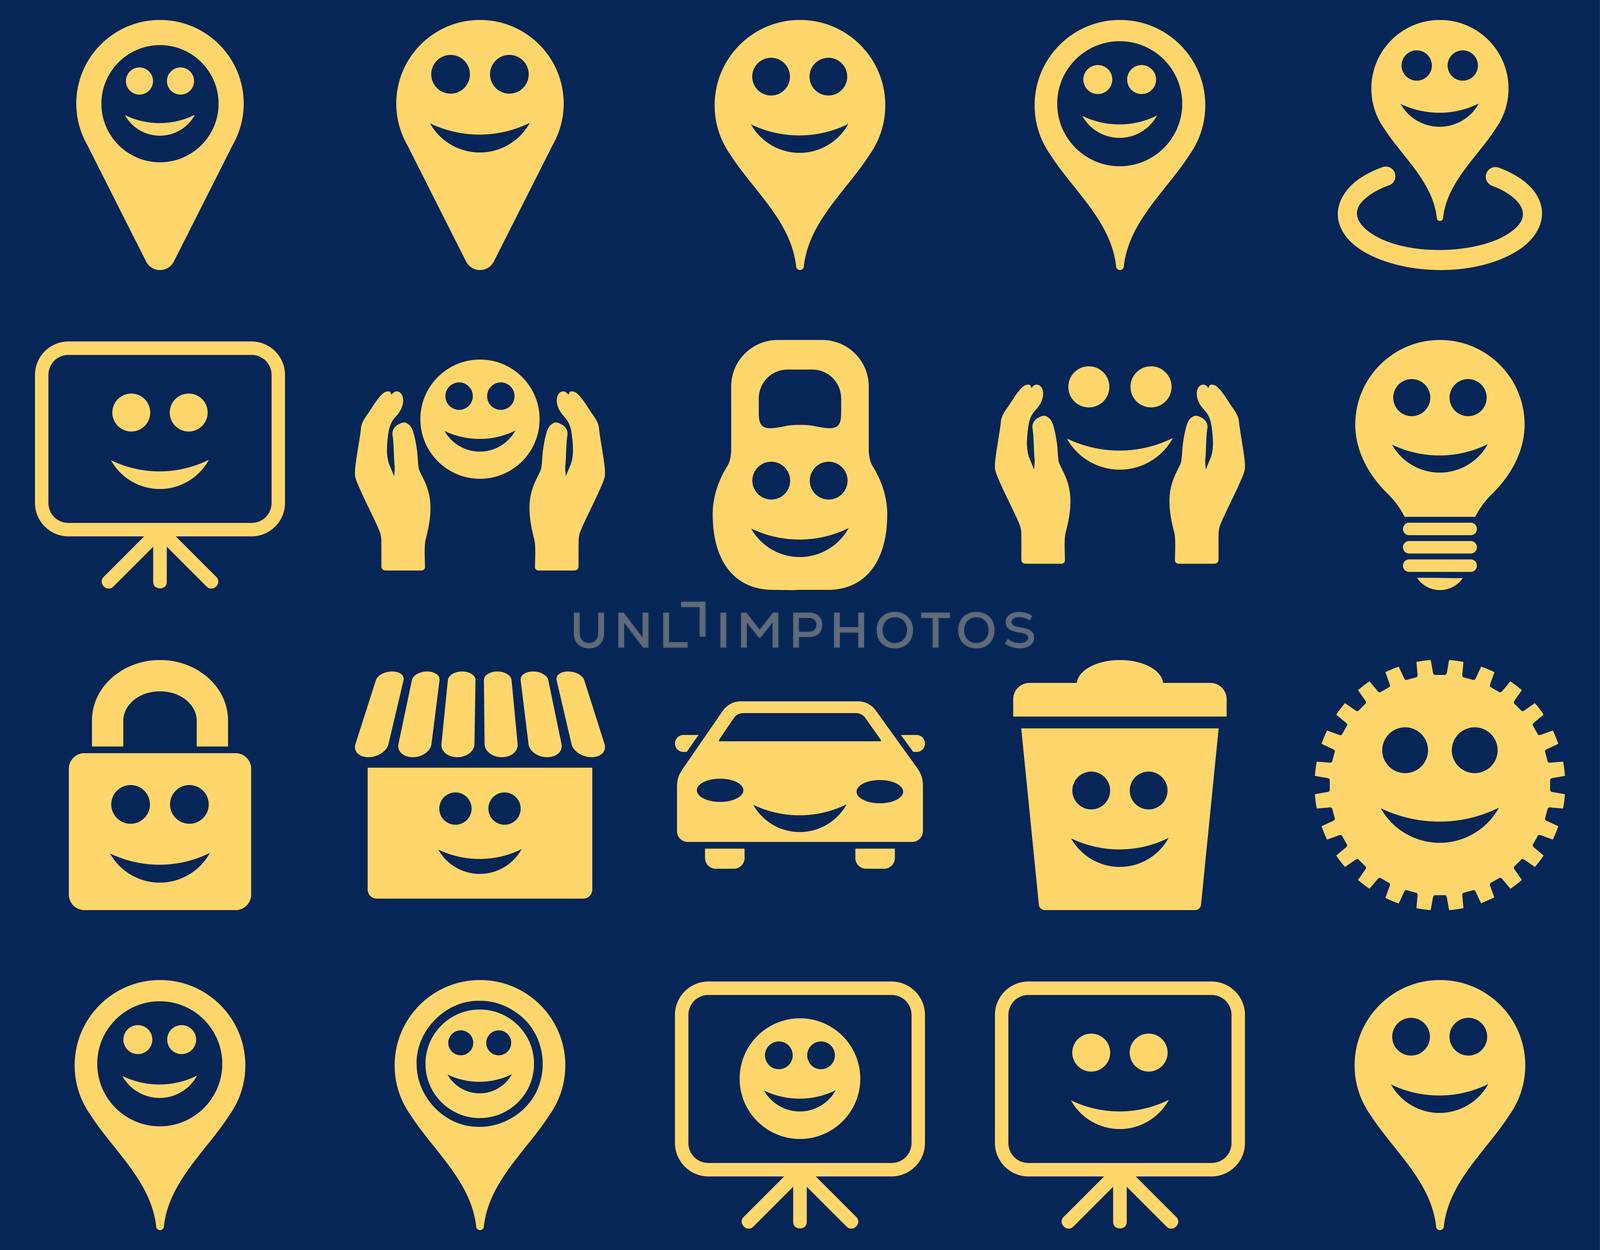 Tools, options, smiles, objects icons. Glyph set style is flat images, yellow symbols, isolated on a blue background.